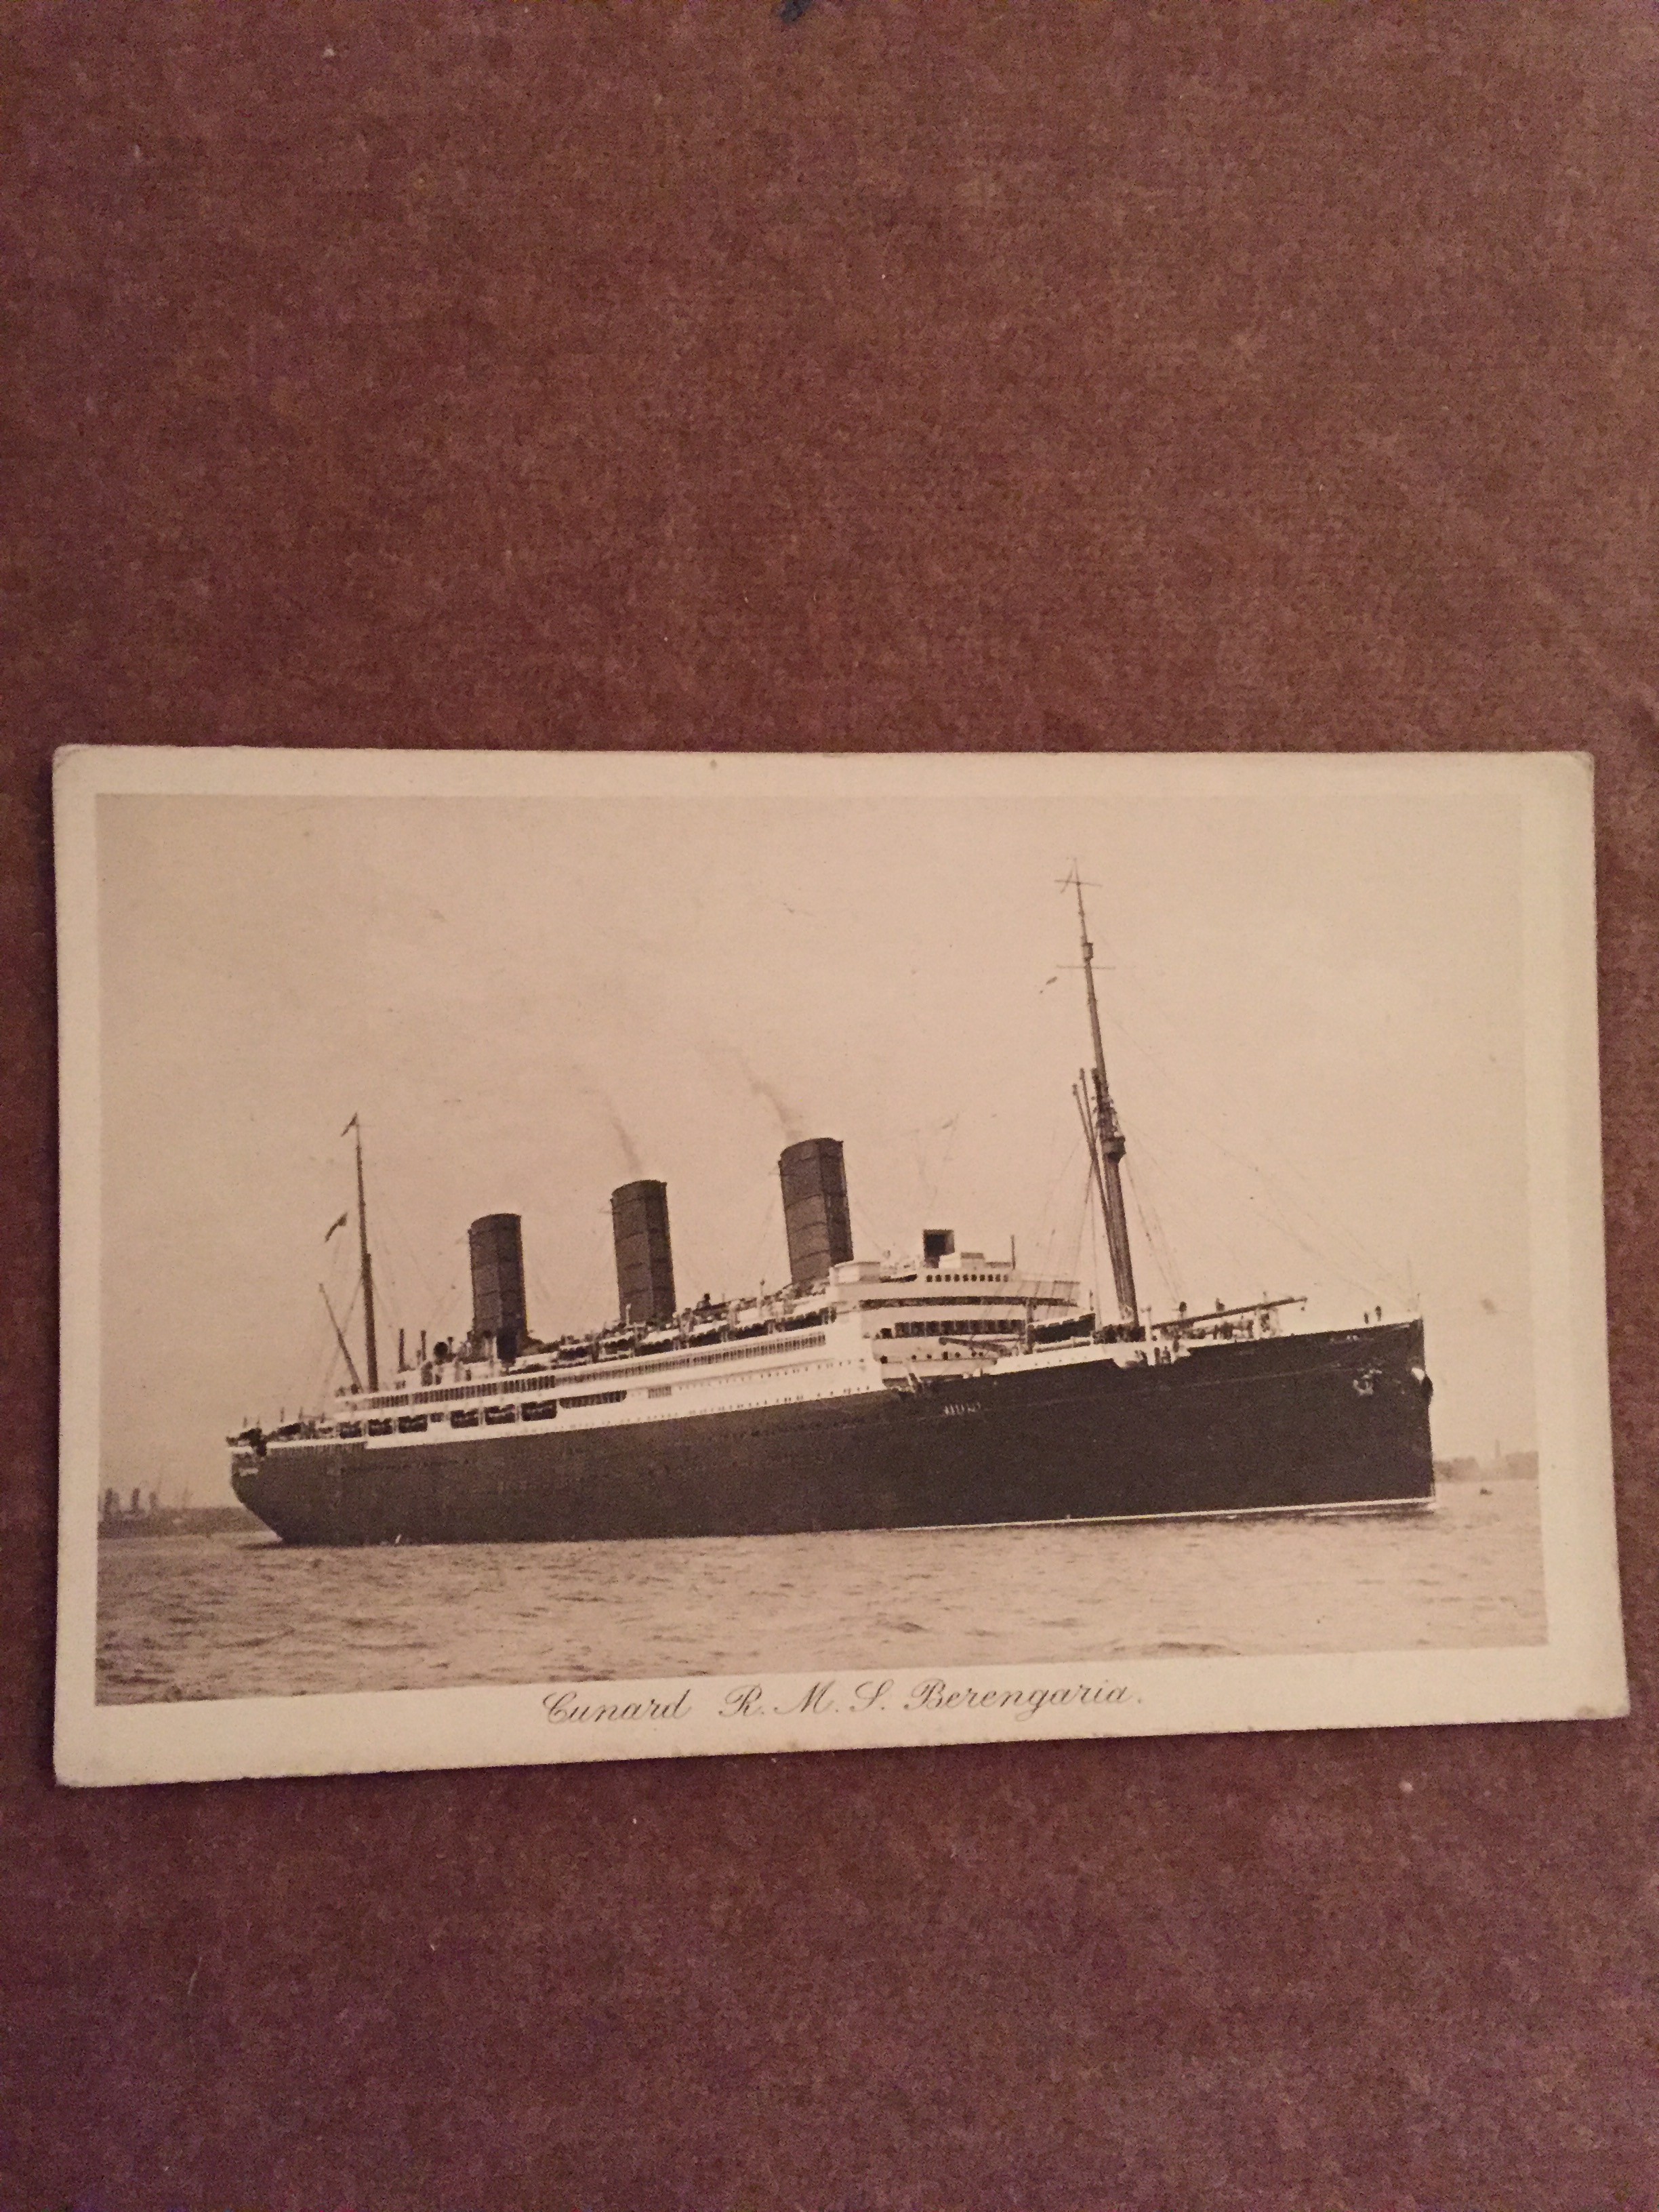 UNUSED B/W POSTCARD FROM THE OLD CUNARD LINE VESSEL THE BERENGARIA